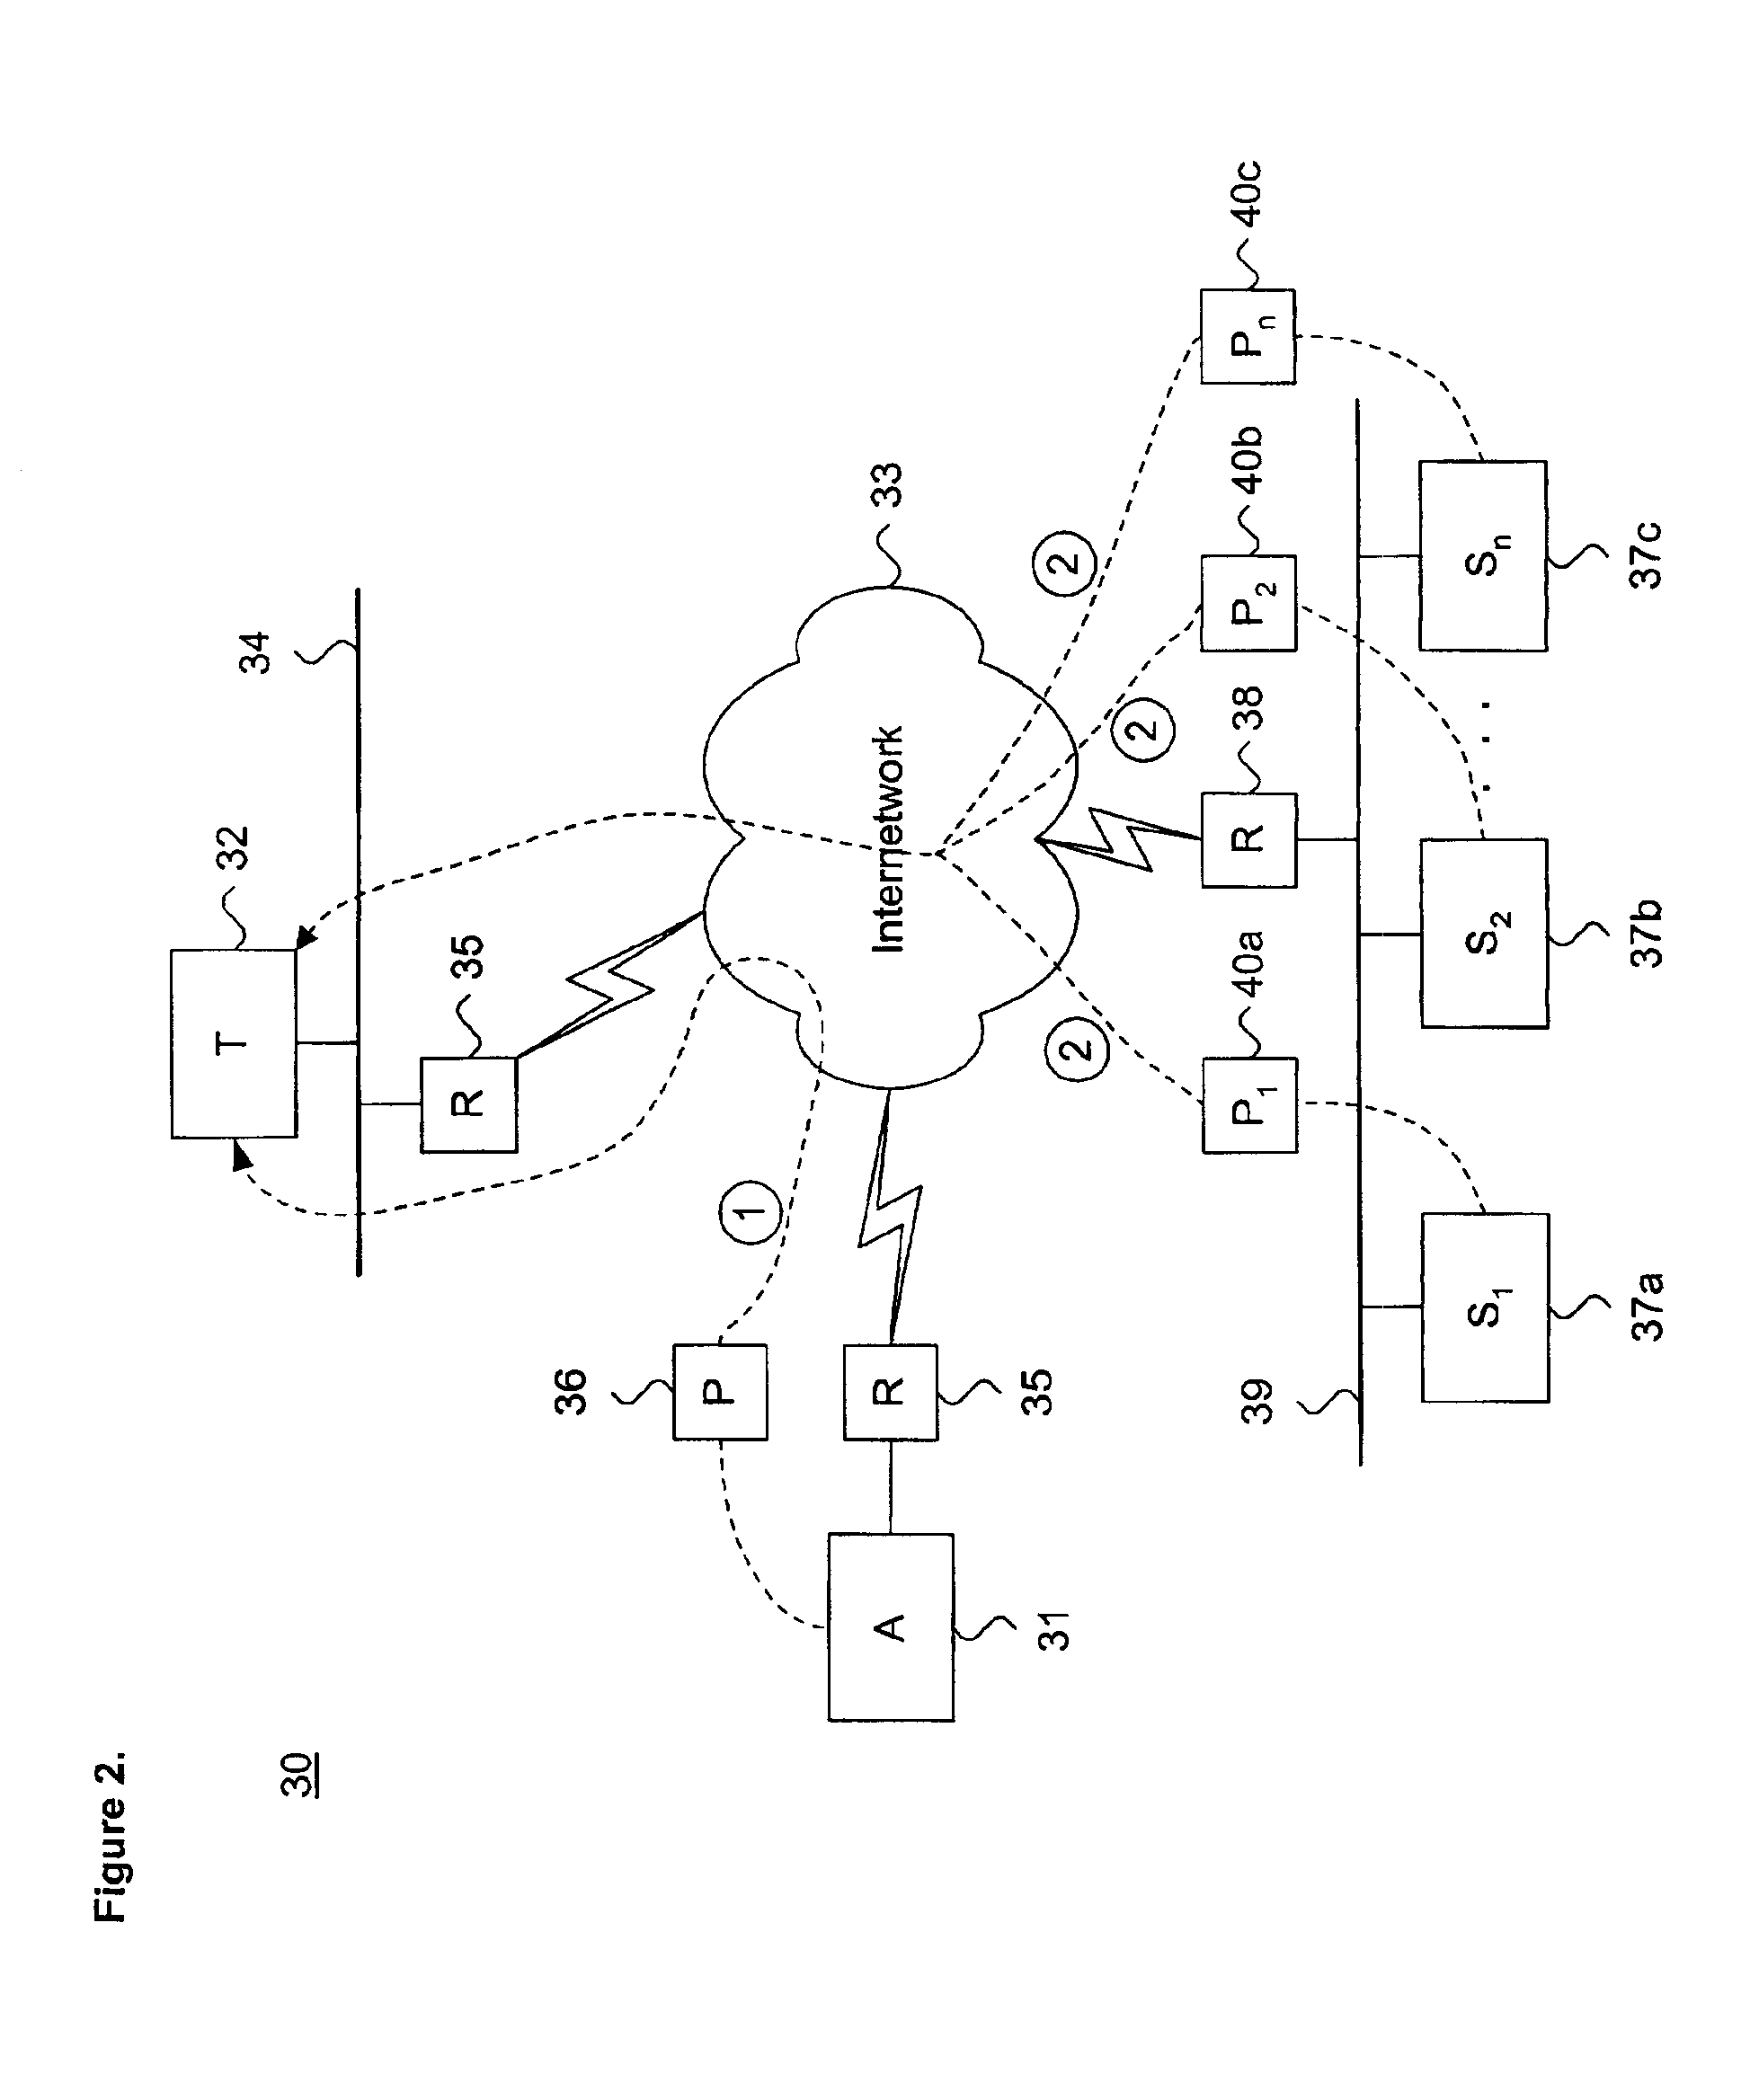 System and method for communicating coalesced rule parameters in a distributed computing environment